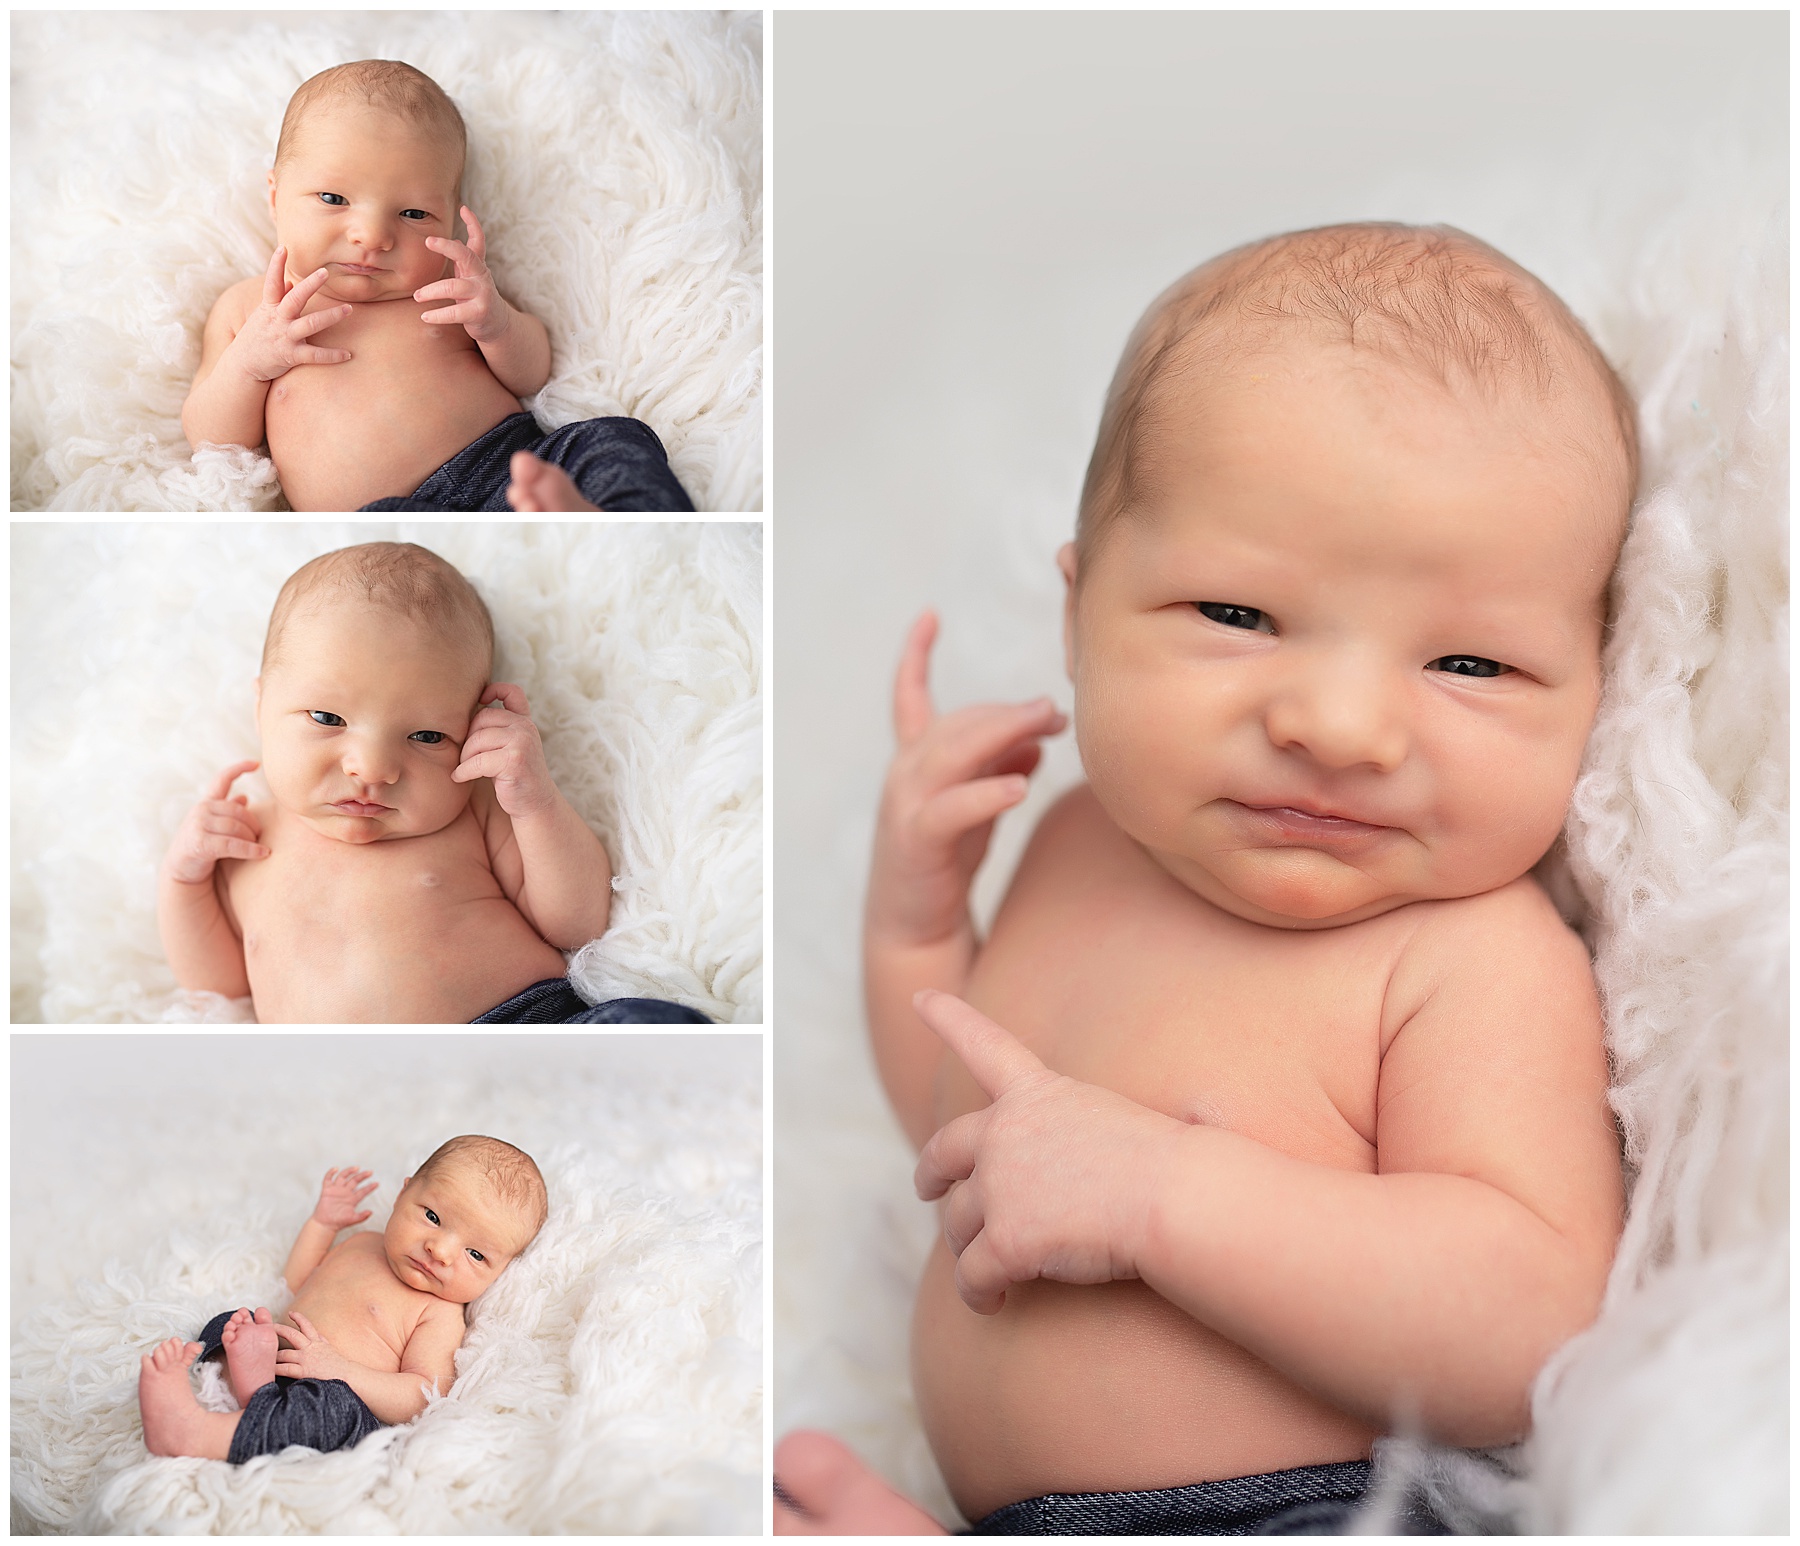 newborn with his eyes open for some photos